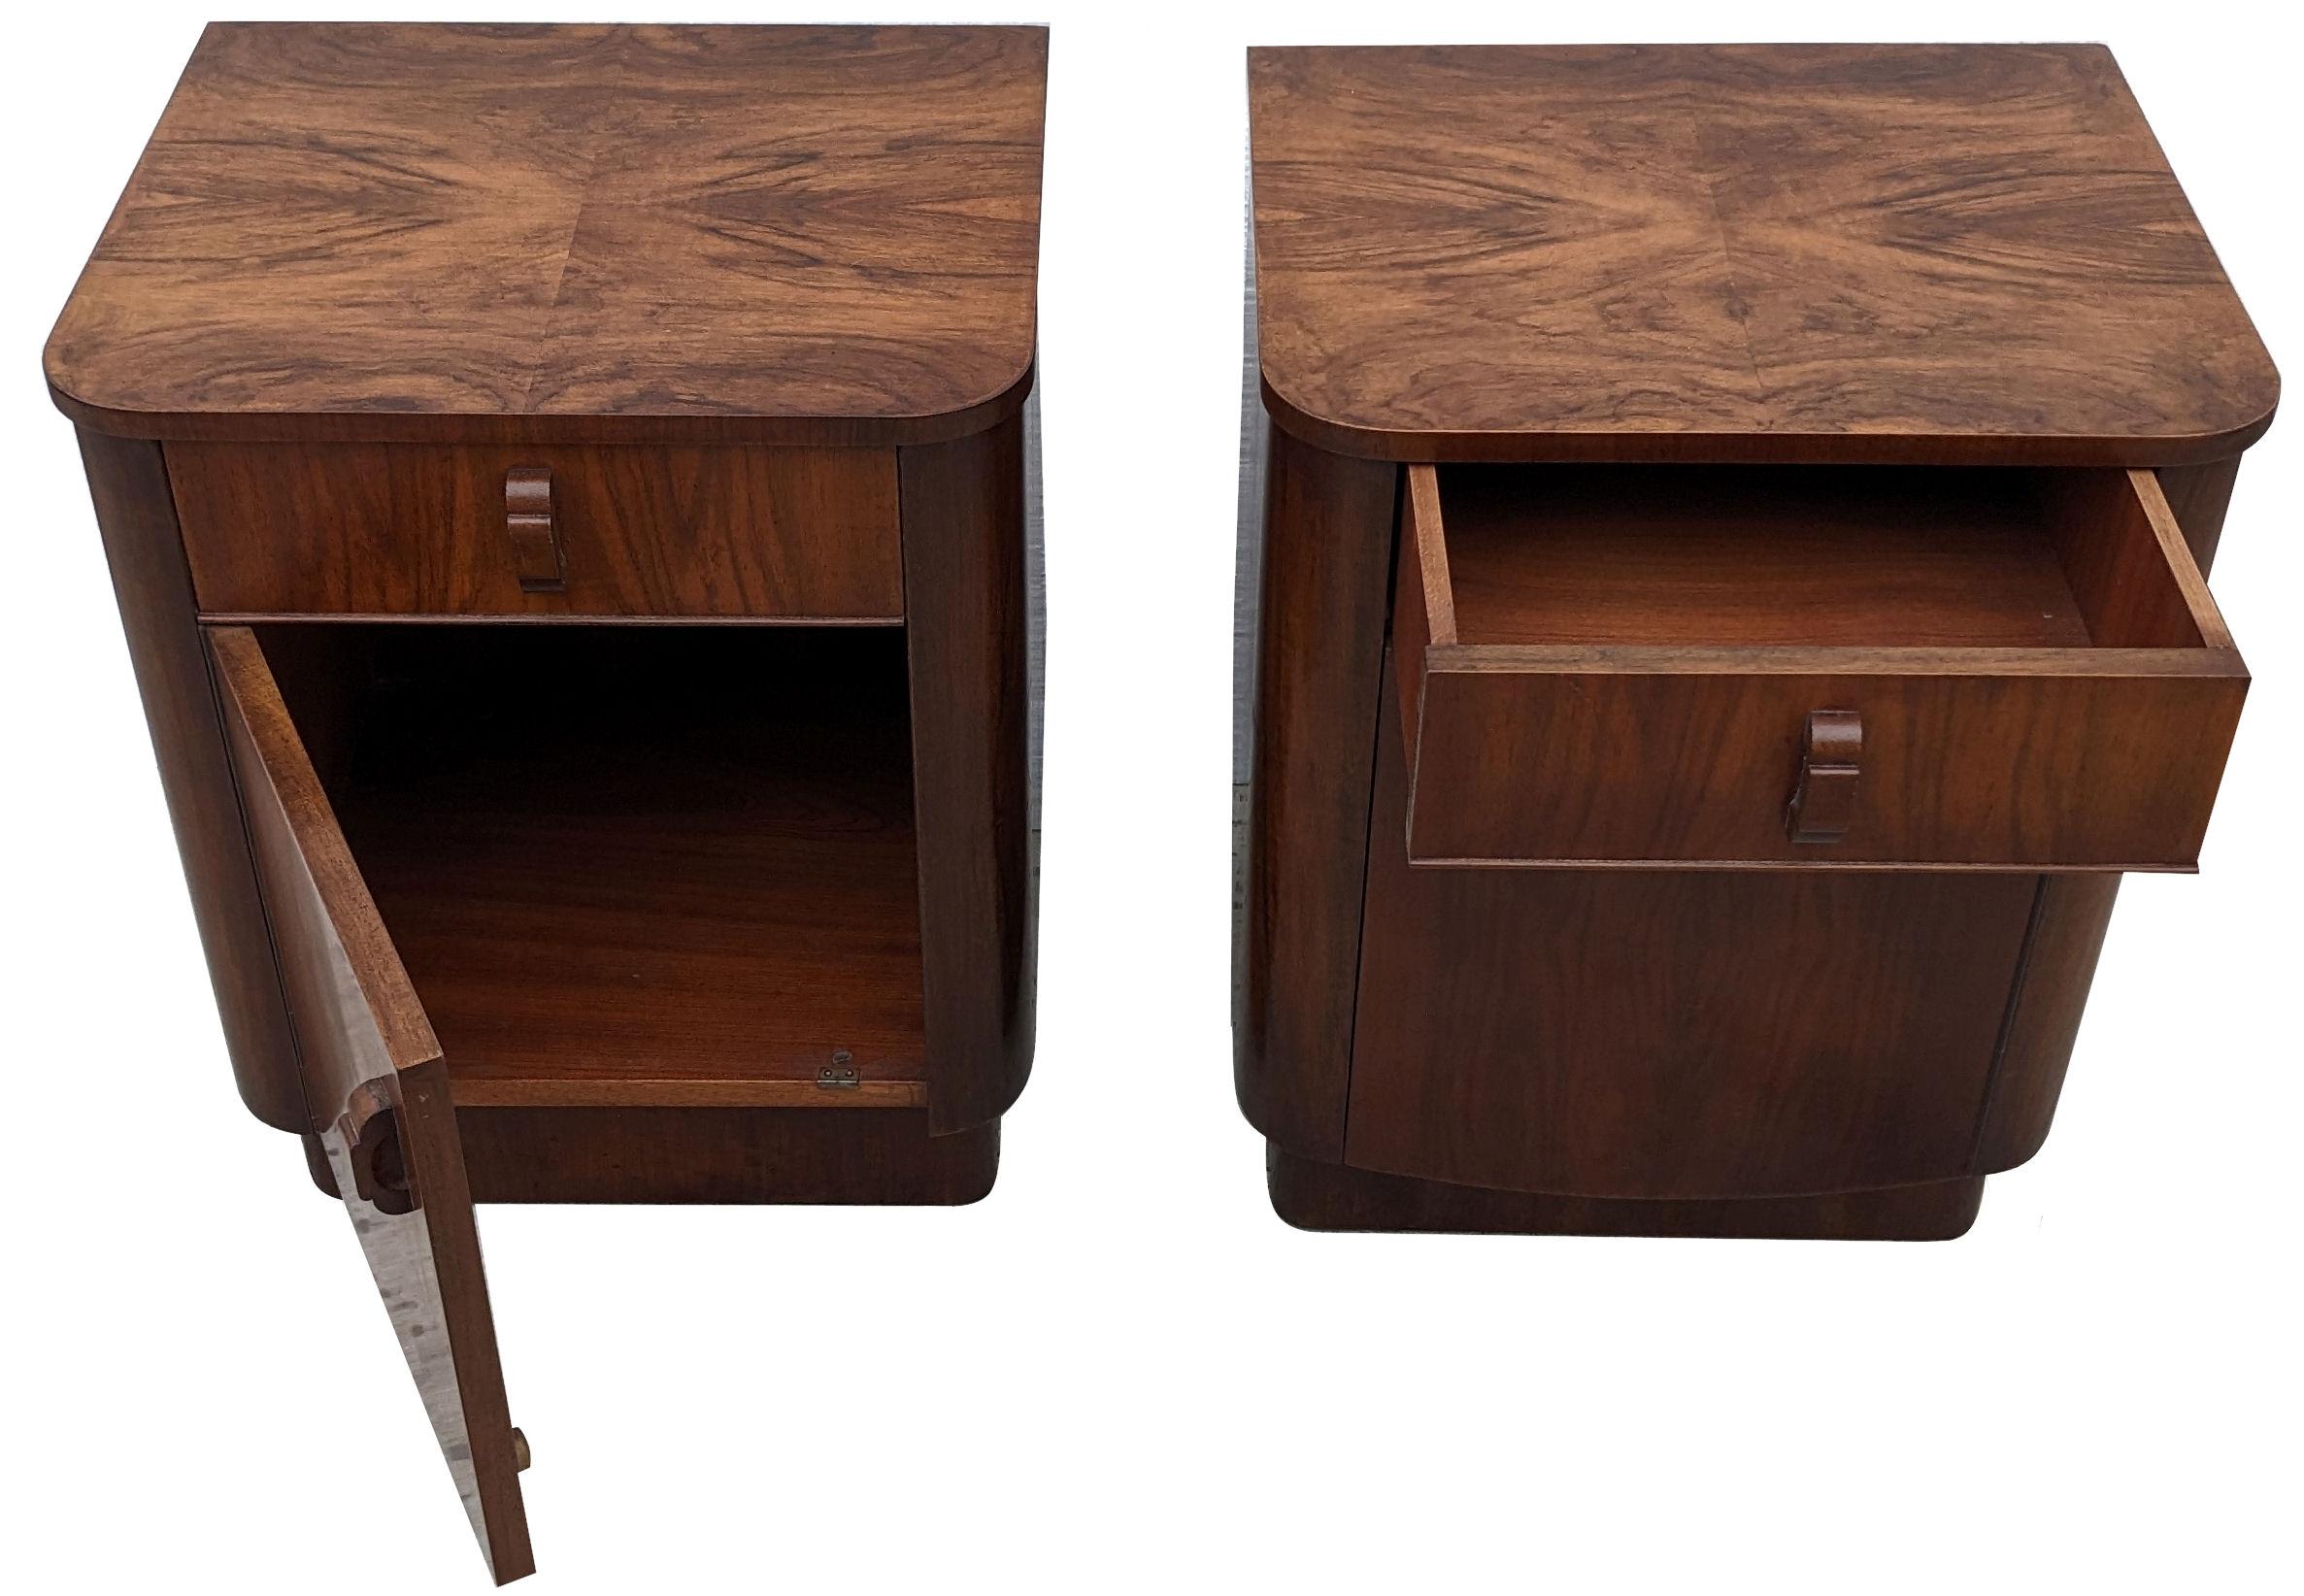 20th Century Art Deco Pair of Matching Bedside Cabinets, Walnut, c1930 For Sale